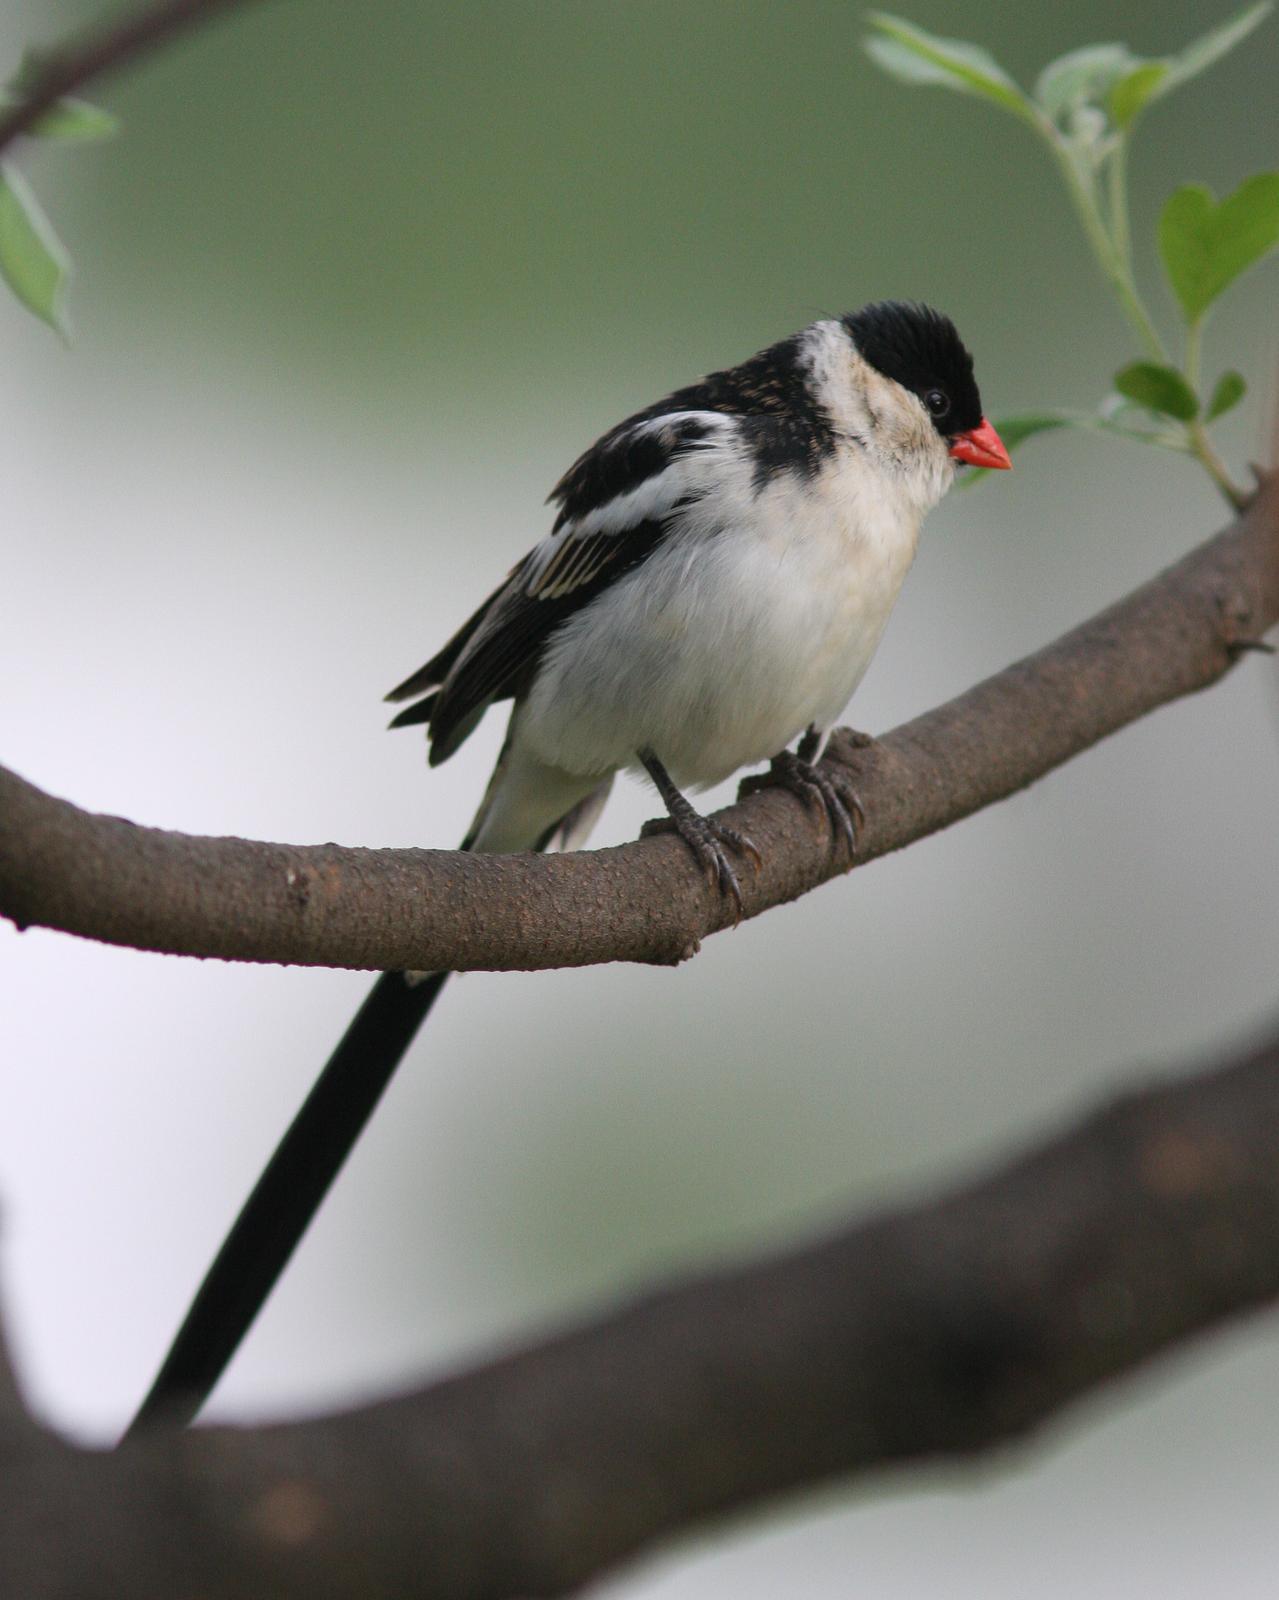 Pin-tailed Whydah Photo by Henk Baptist